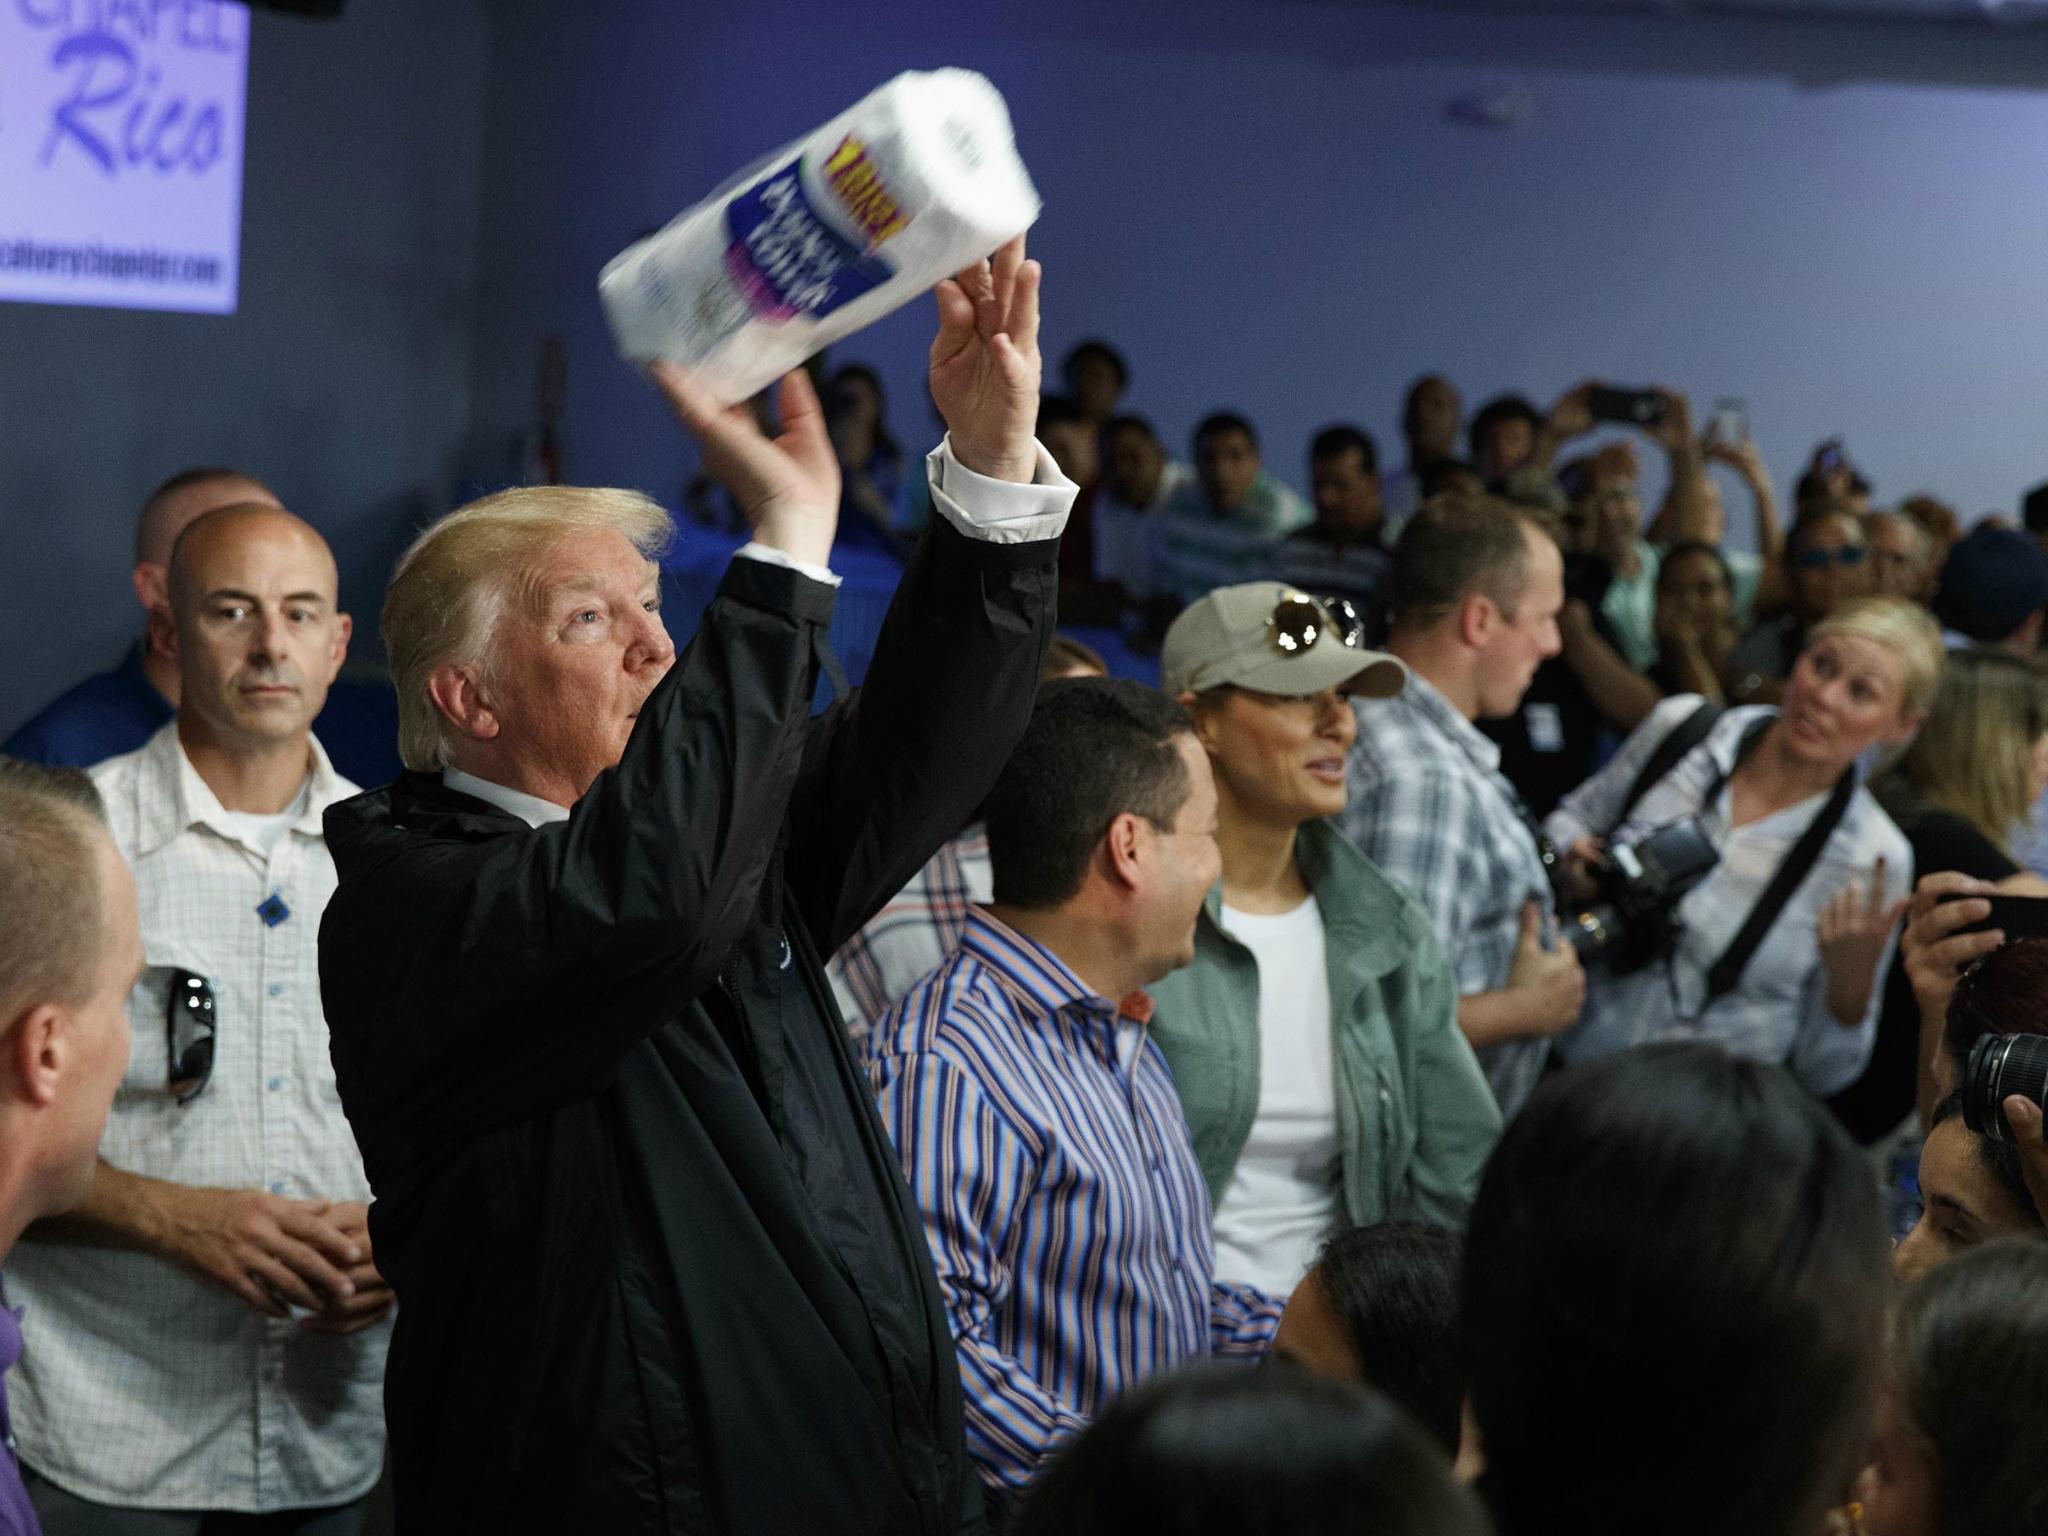 The President visited Puerto Rico, where he visited an aid distribution centre